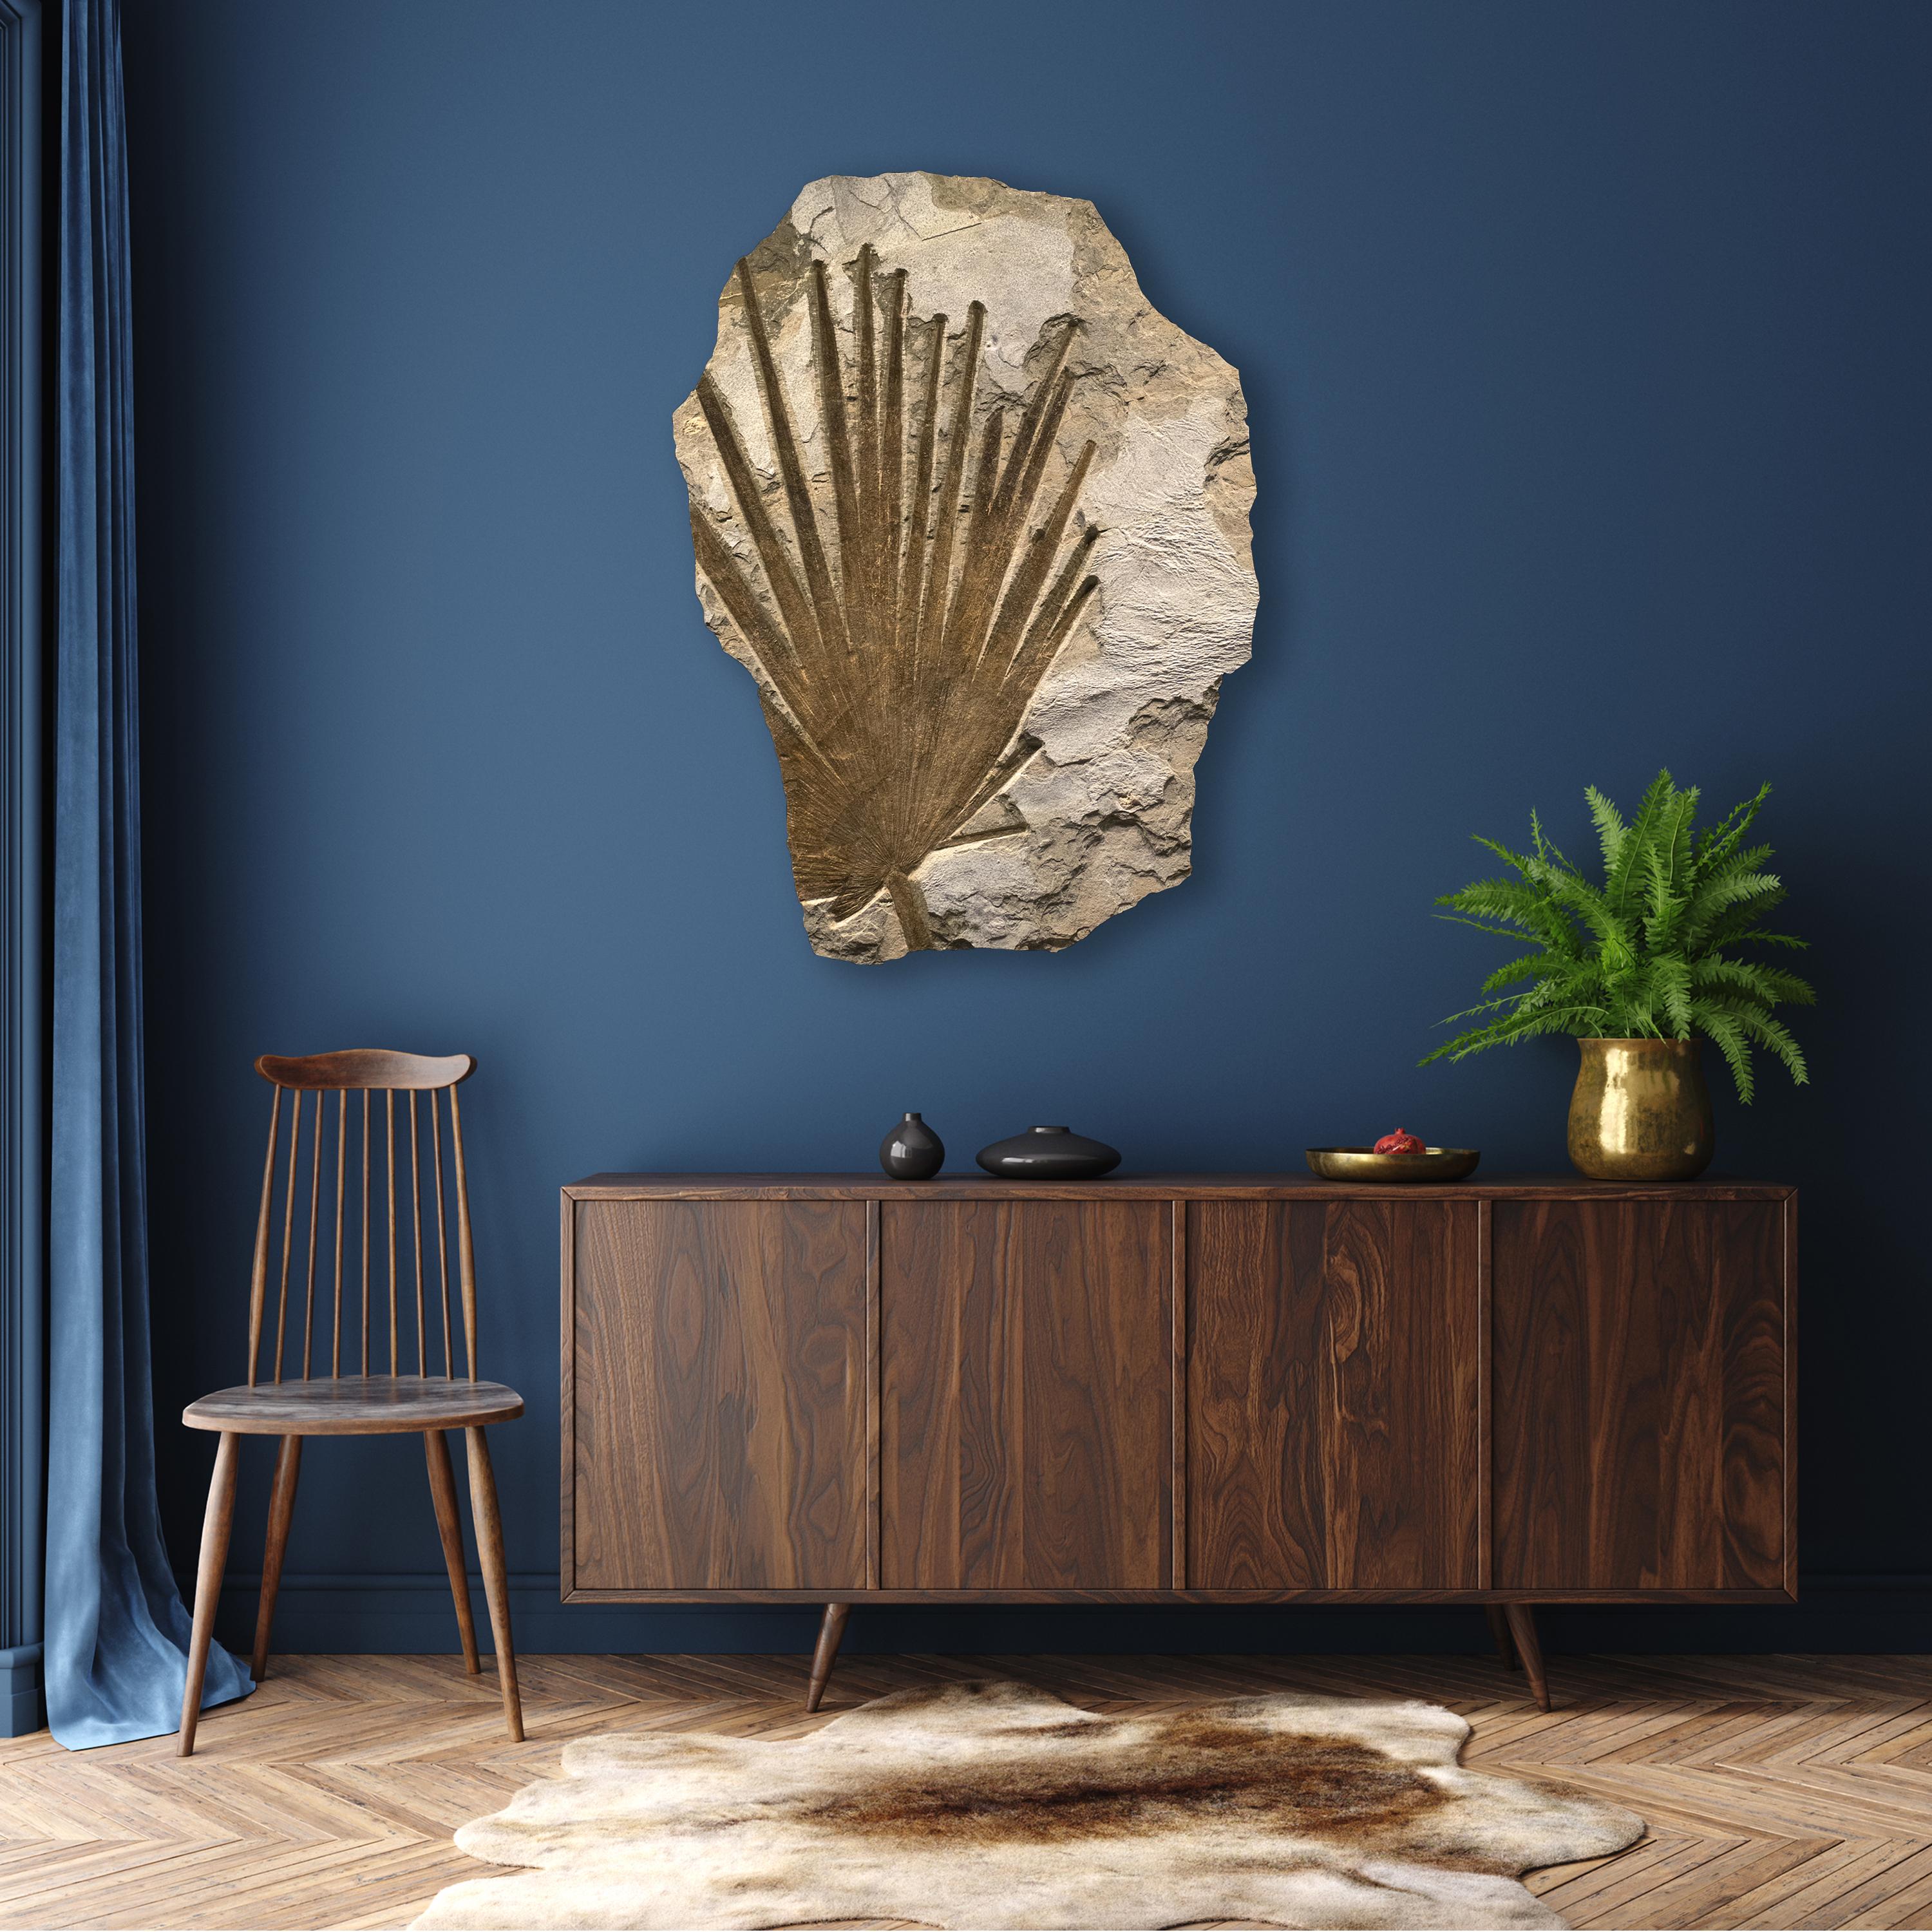 This mural features a beautiful fossilized palm frond, which is an Eocene era fossil dating back about 50 million years. Plant life often produces some of the most aesthetic Green River Formation fossils we have prepared over the years. Due to the